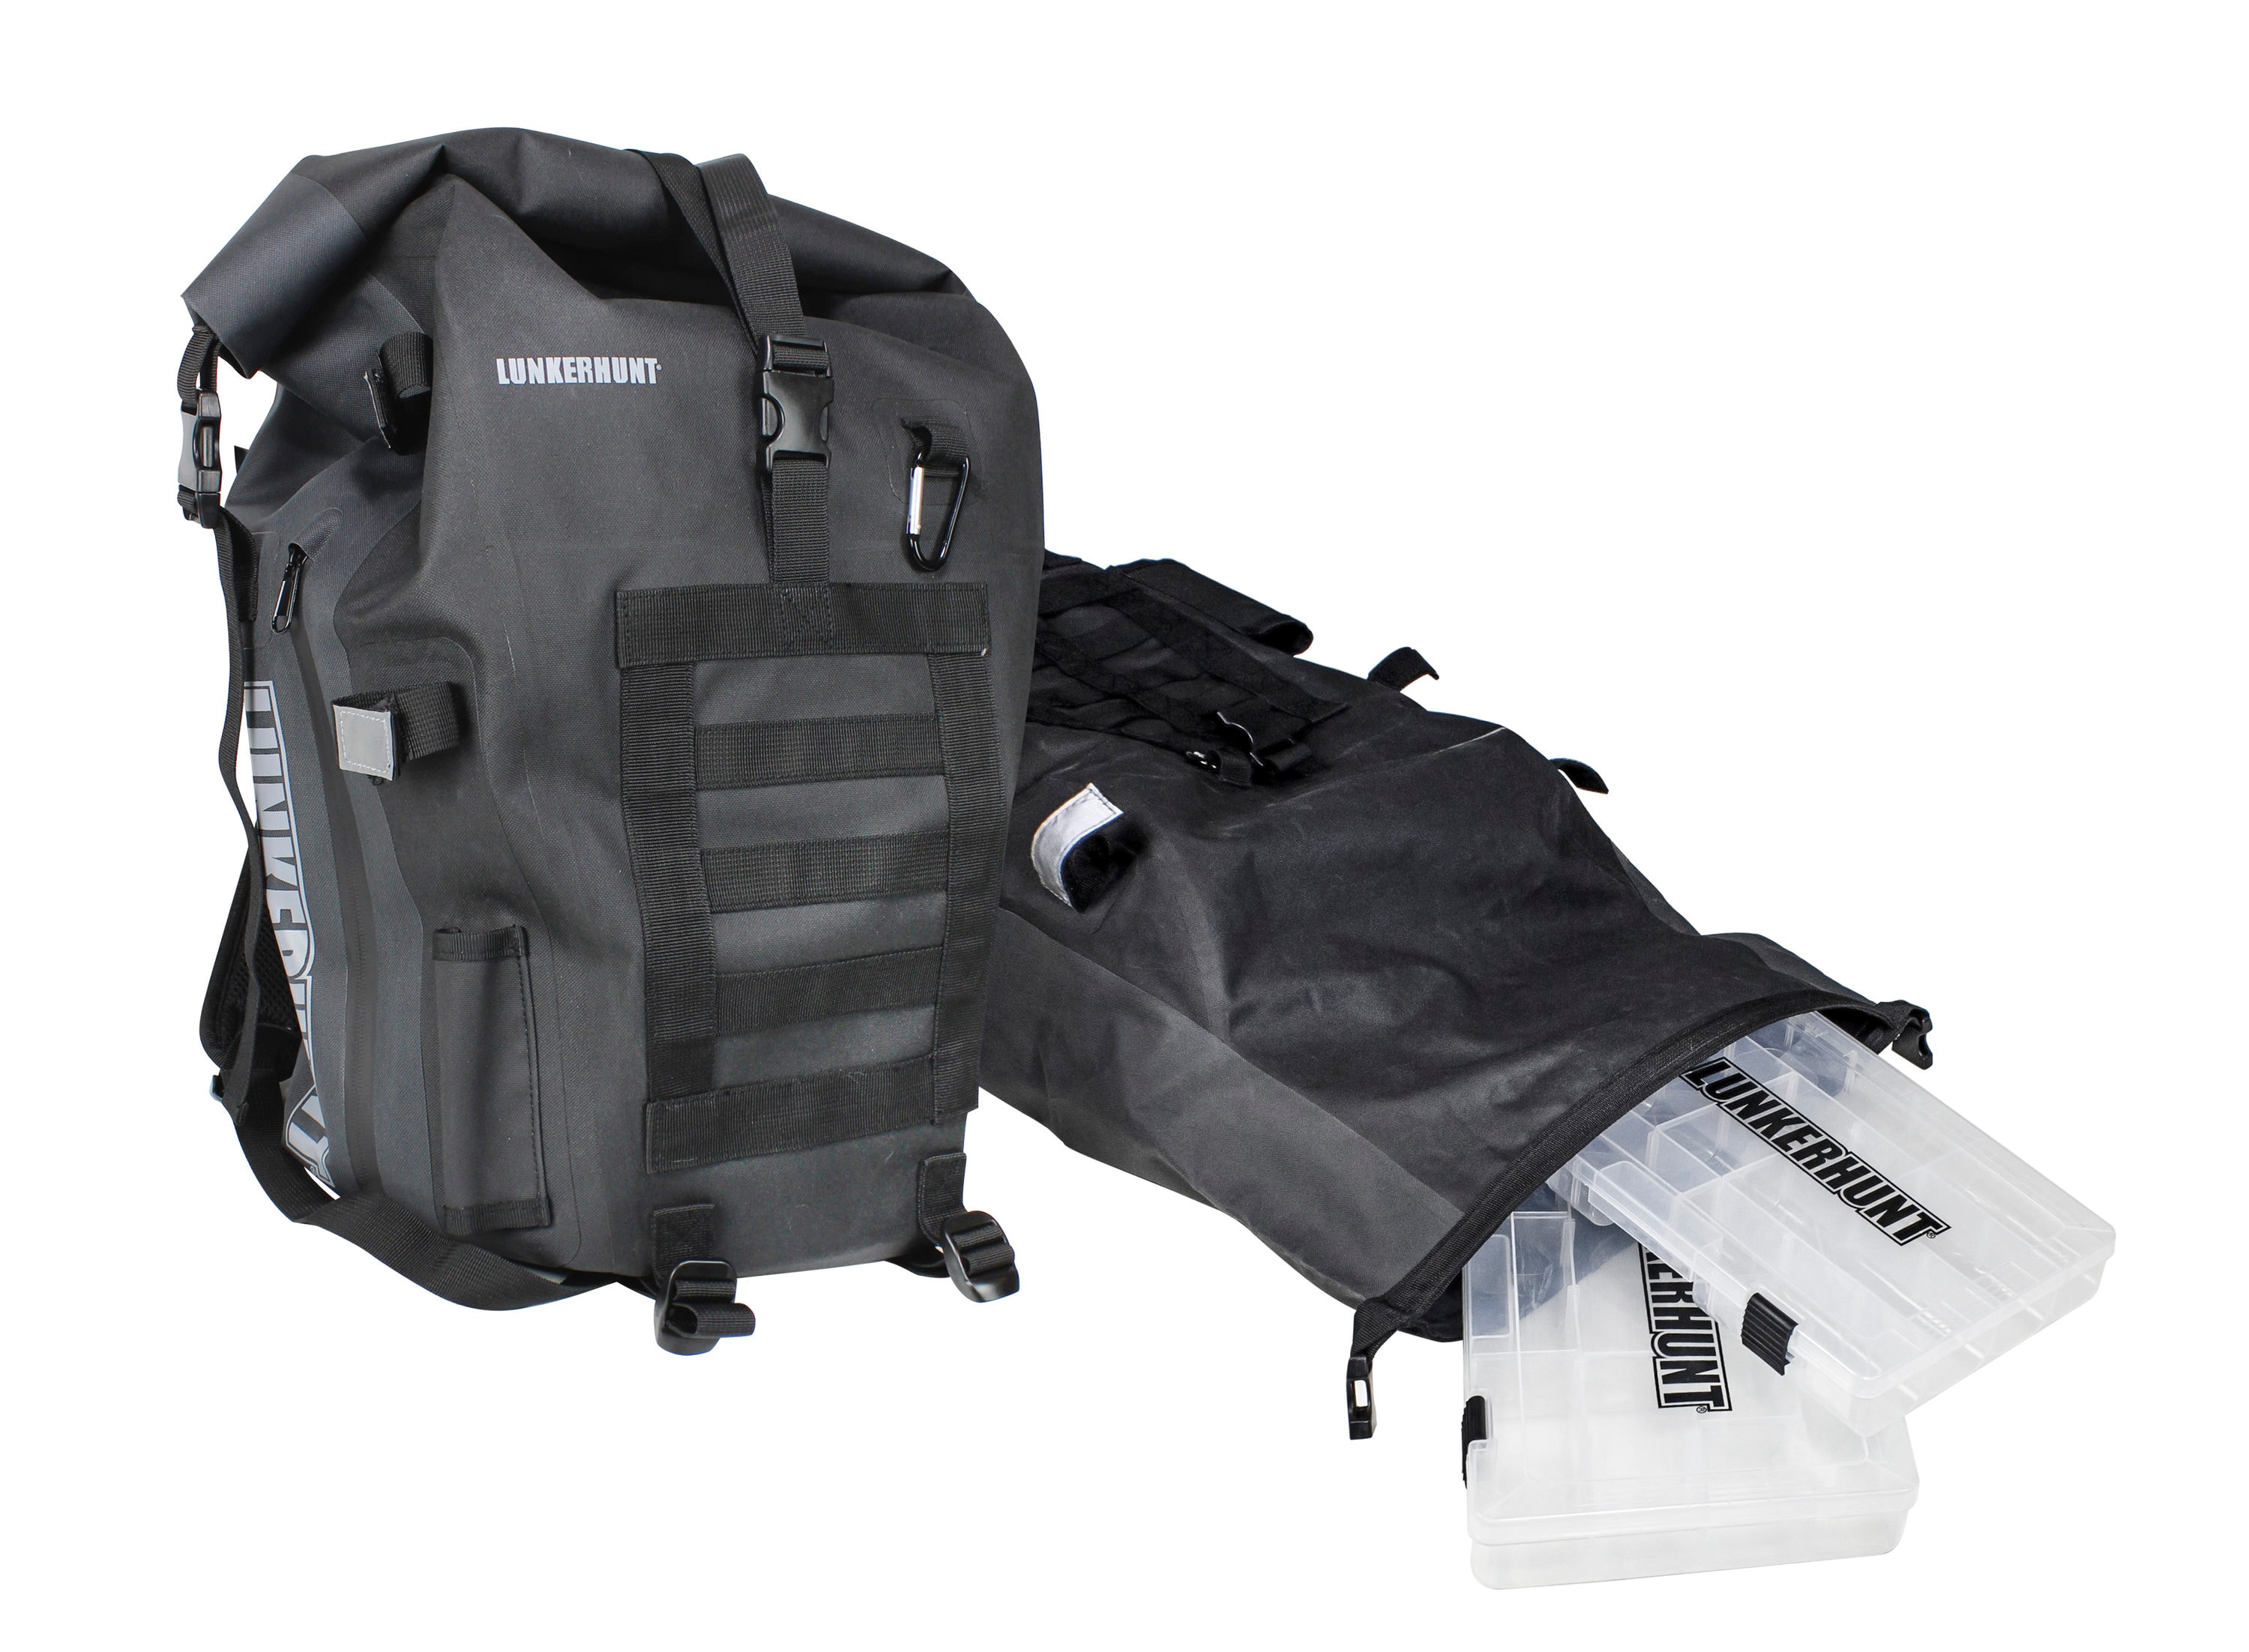 LUNKERHUNT LTS Avid waterproof backpack with 2 tackle trays